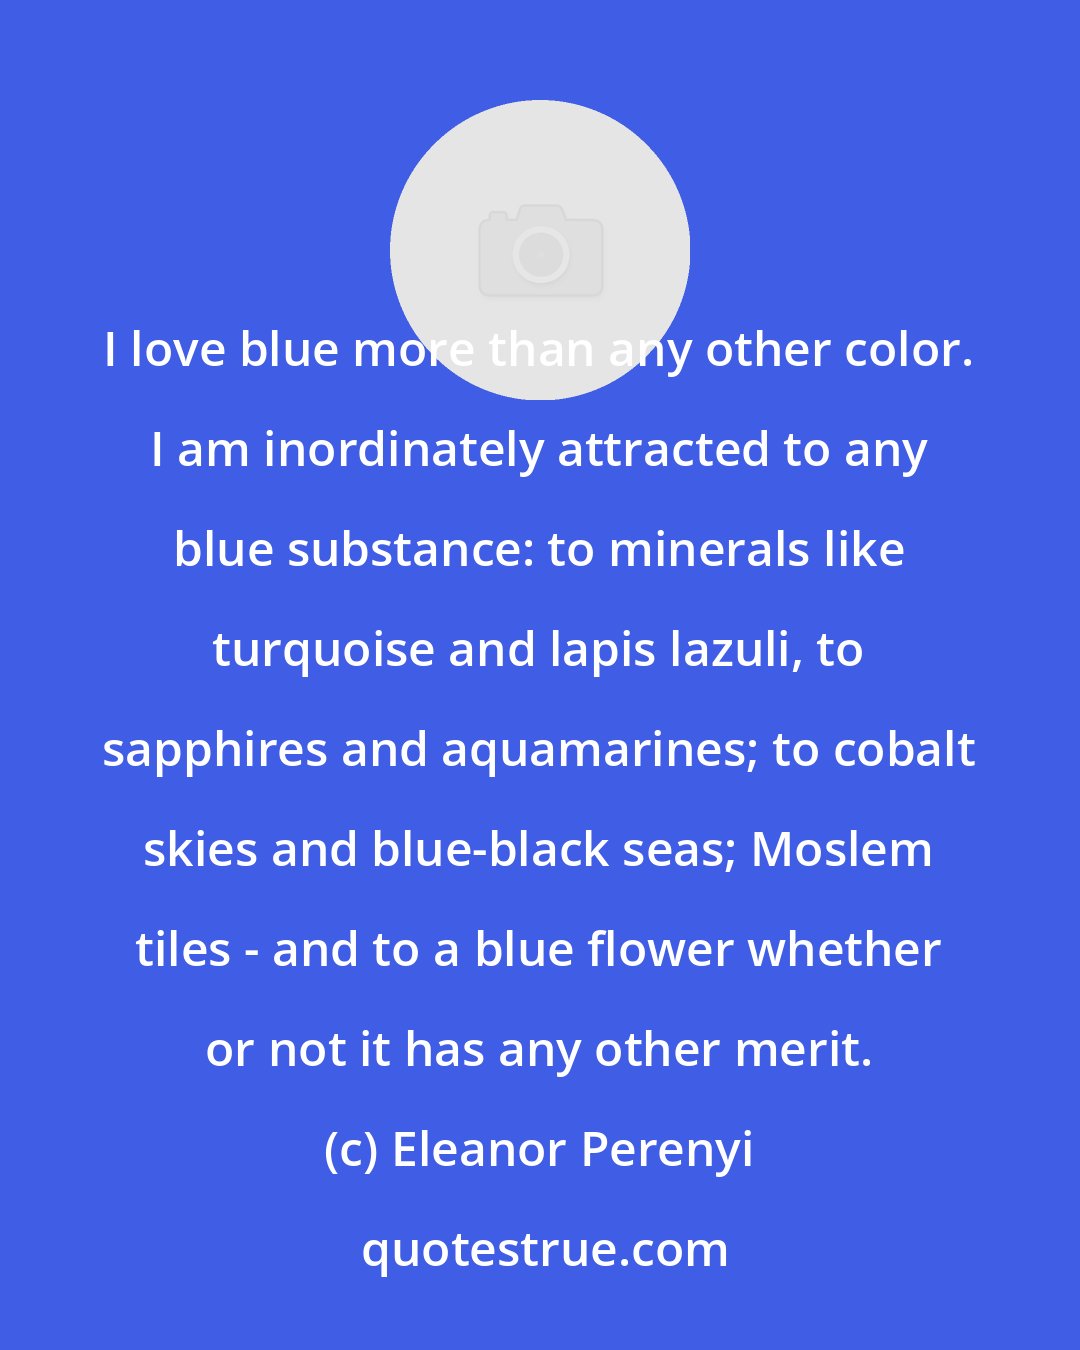 Eleanor Perenyi: I love blue more than any other color. I am inordinately attracted to any blue substance: to minerals like turquoise and lapis lazuli, to sapphires and aquamarines; to cobalt skies and blue-black seas; Moslem tiles - and to a blue flower whether or not it has any other merit.